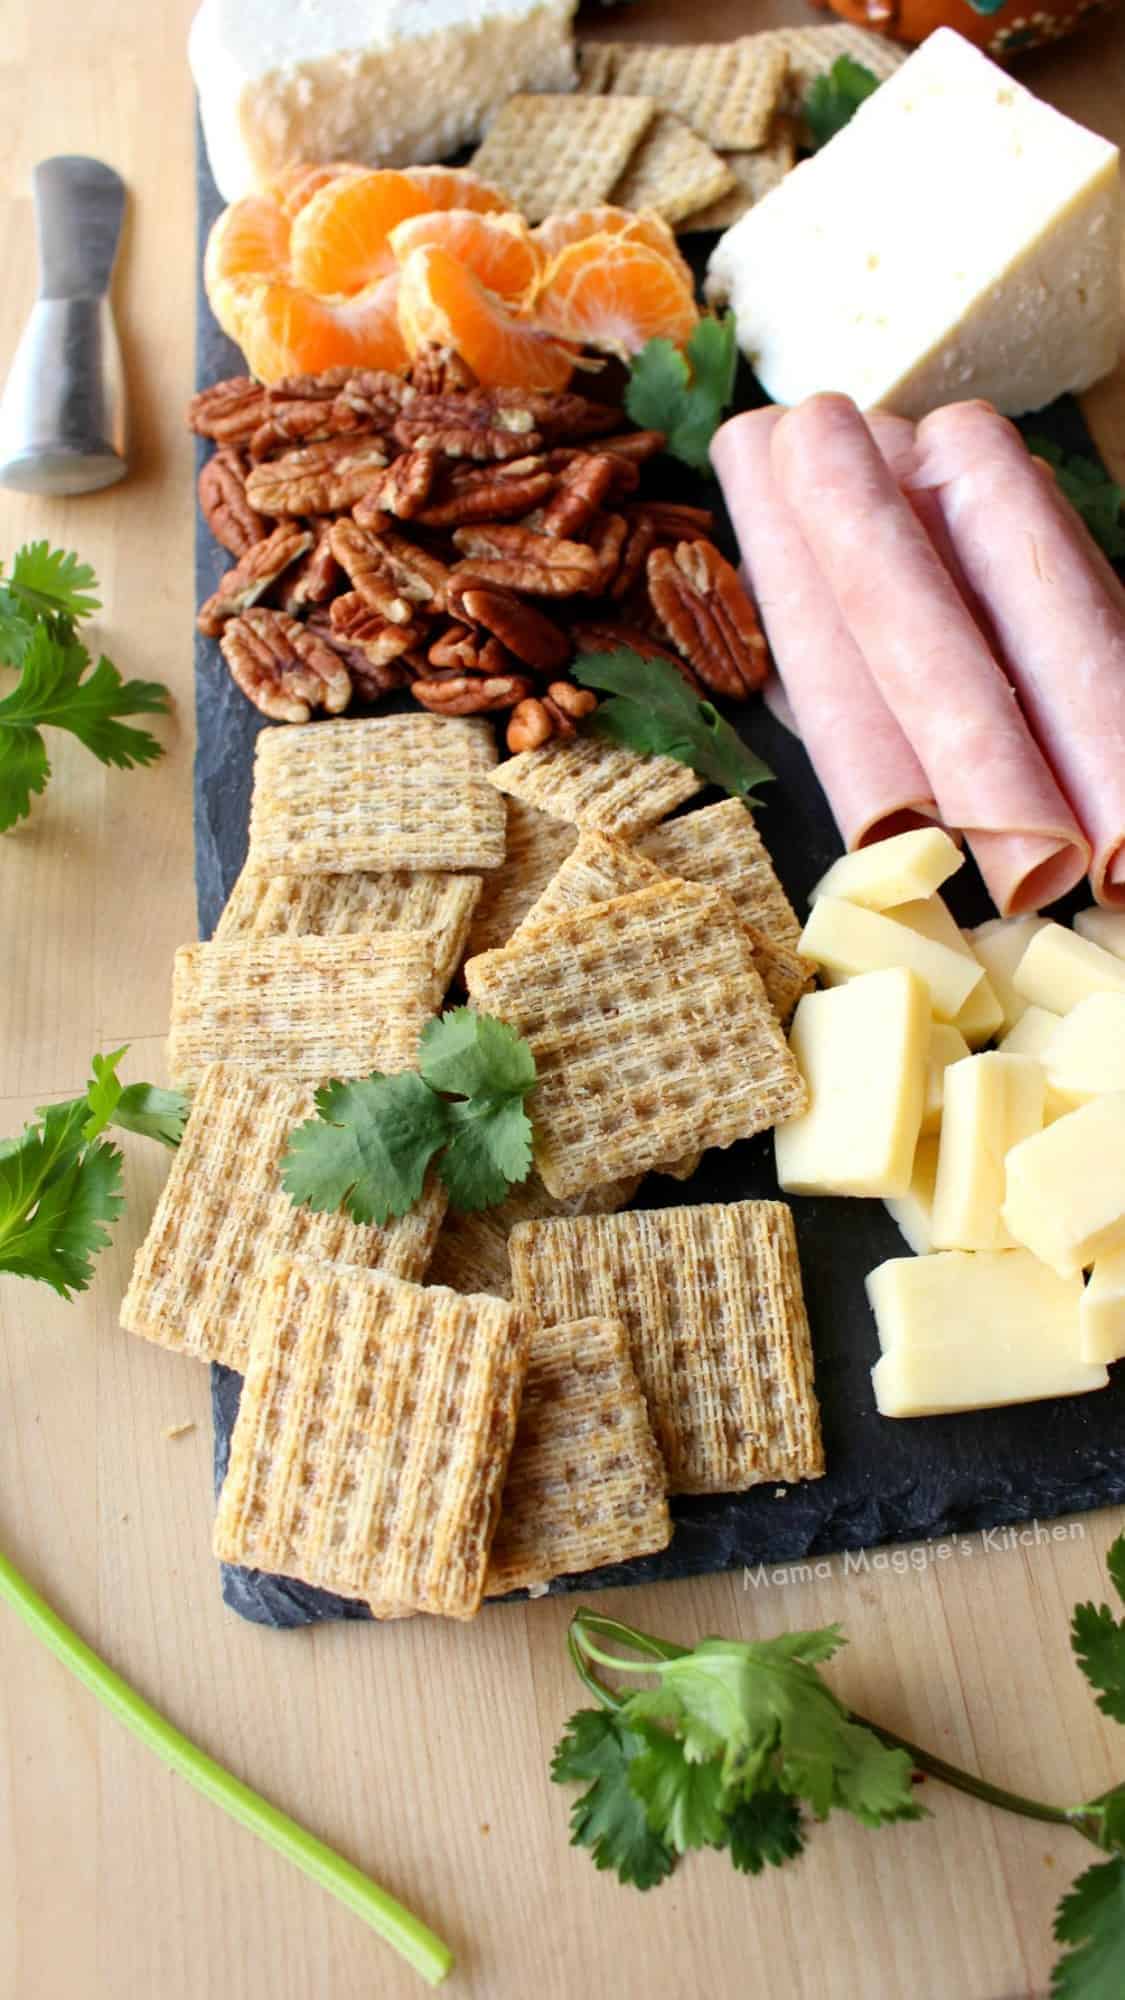 Triscuits on a Mexican Charcuterie board next to guacamole, con salsa, olives, and different kinds of Mexican cheeses.